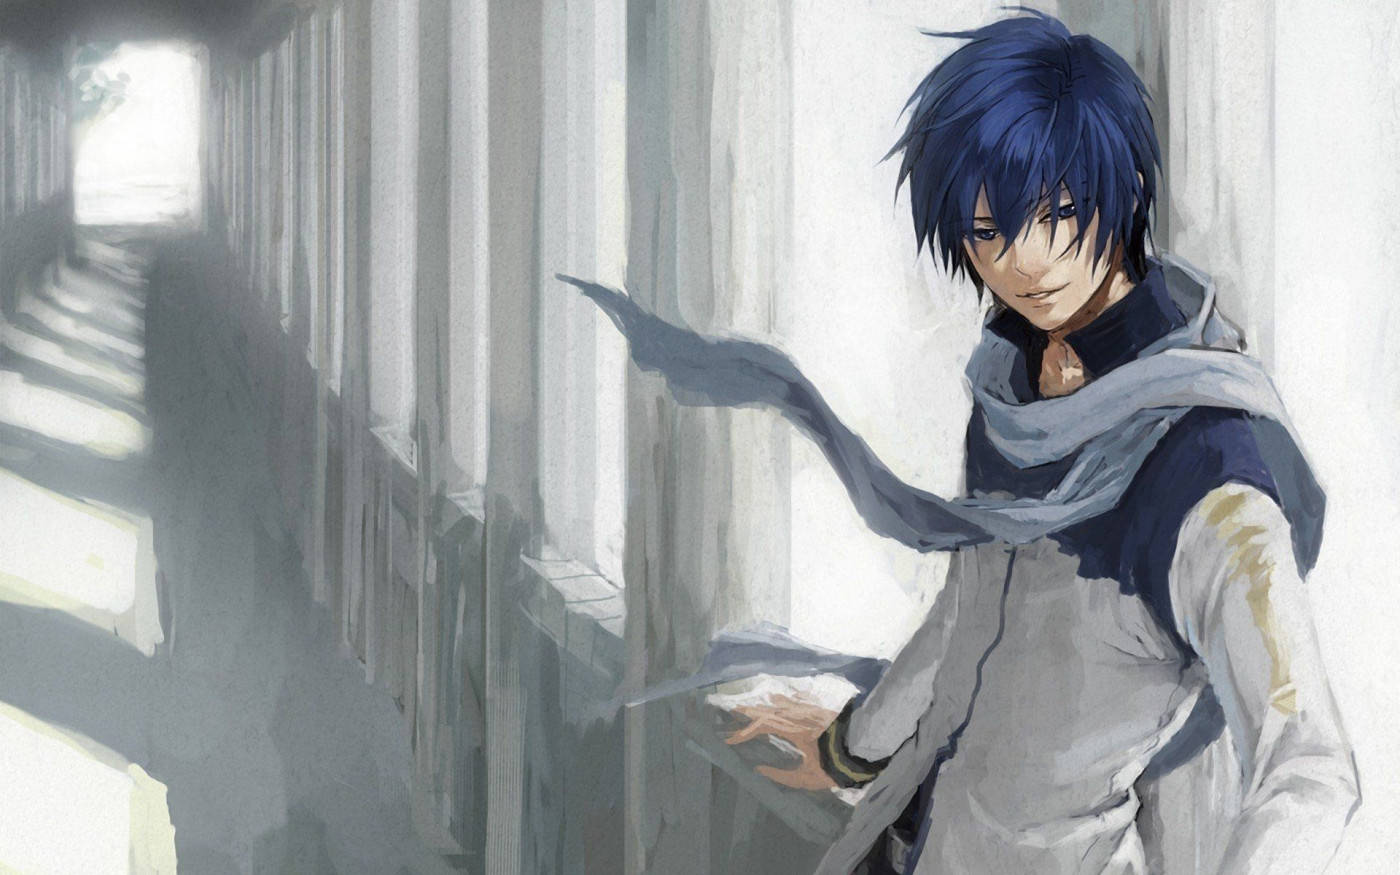 An Anime Blue Boy Standing in the Foreground Wallpaper